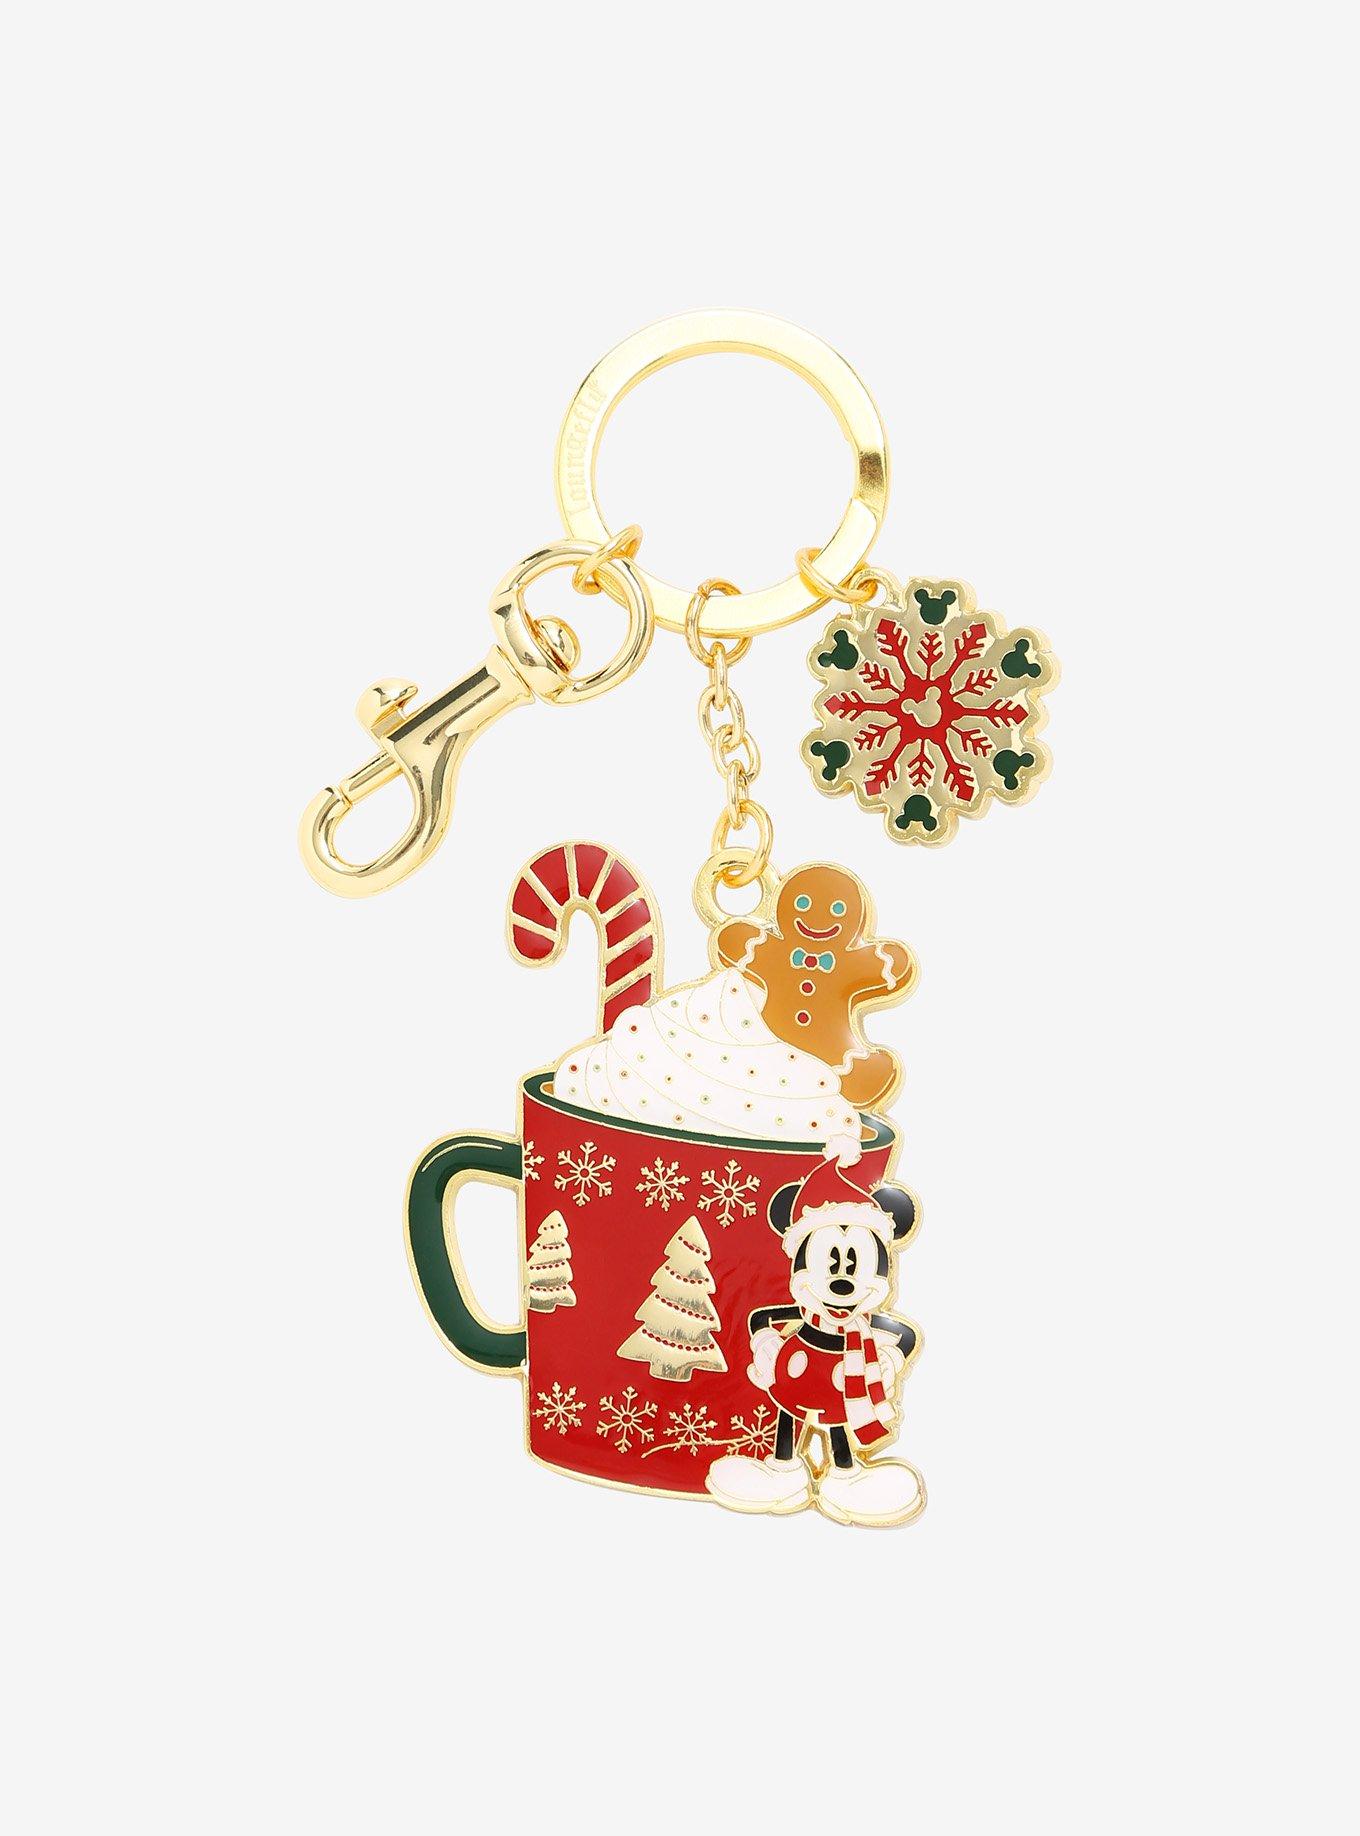 Mickey Mouse in hat with cane Disneyland keychain from our